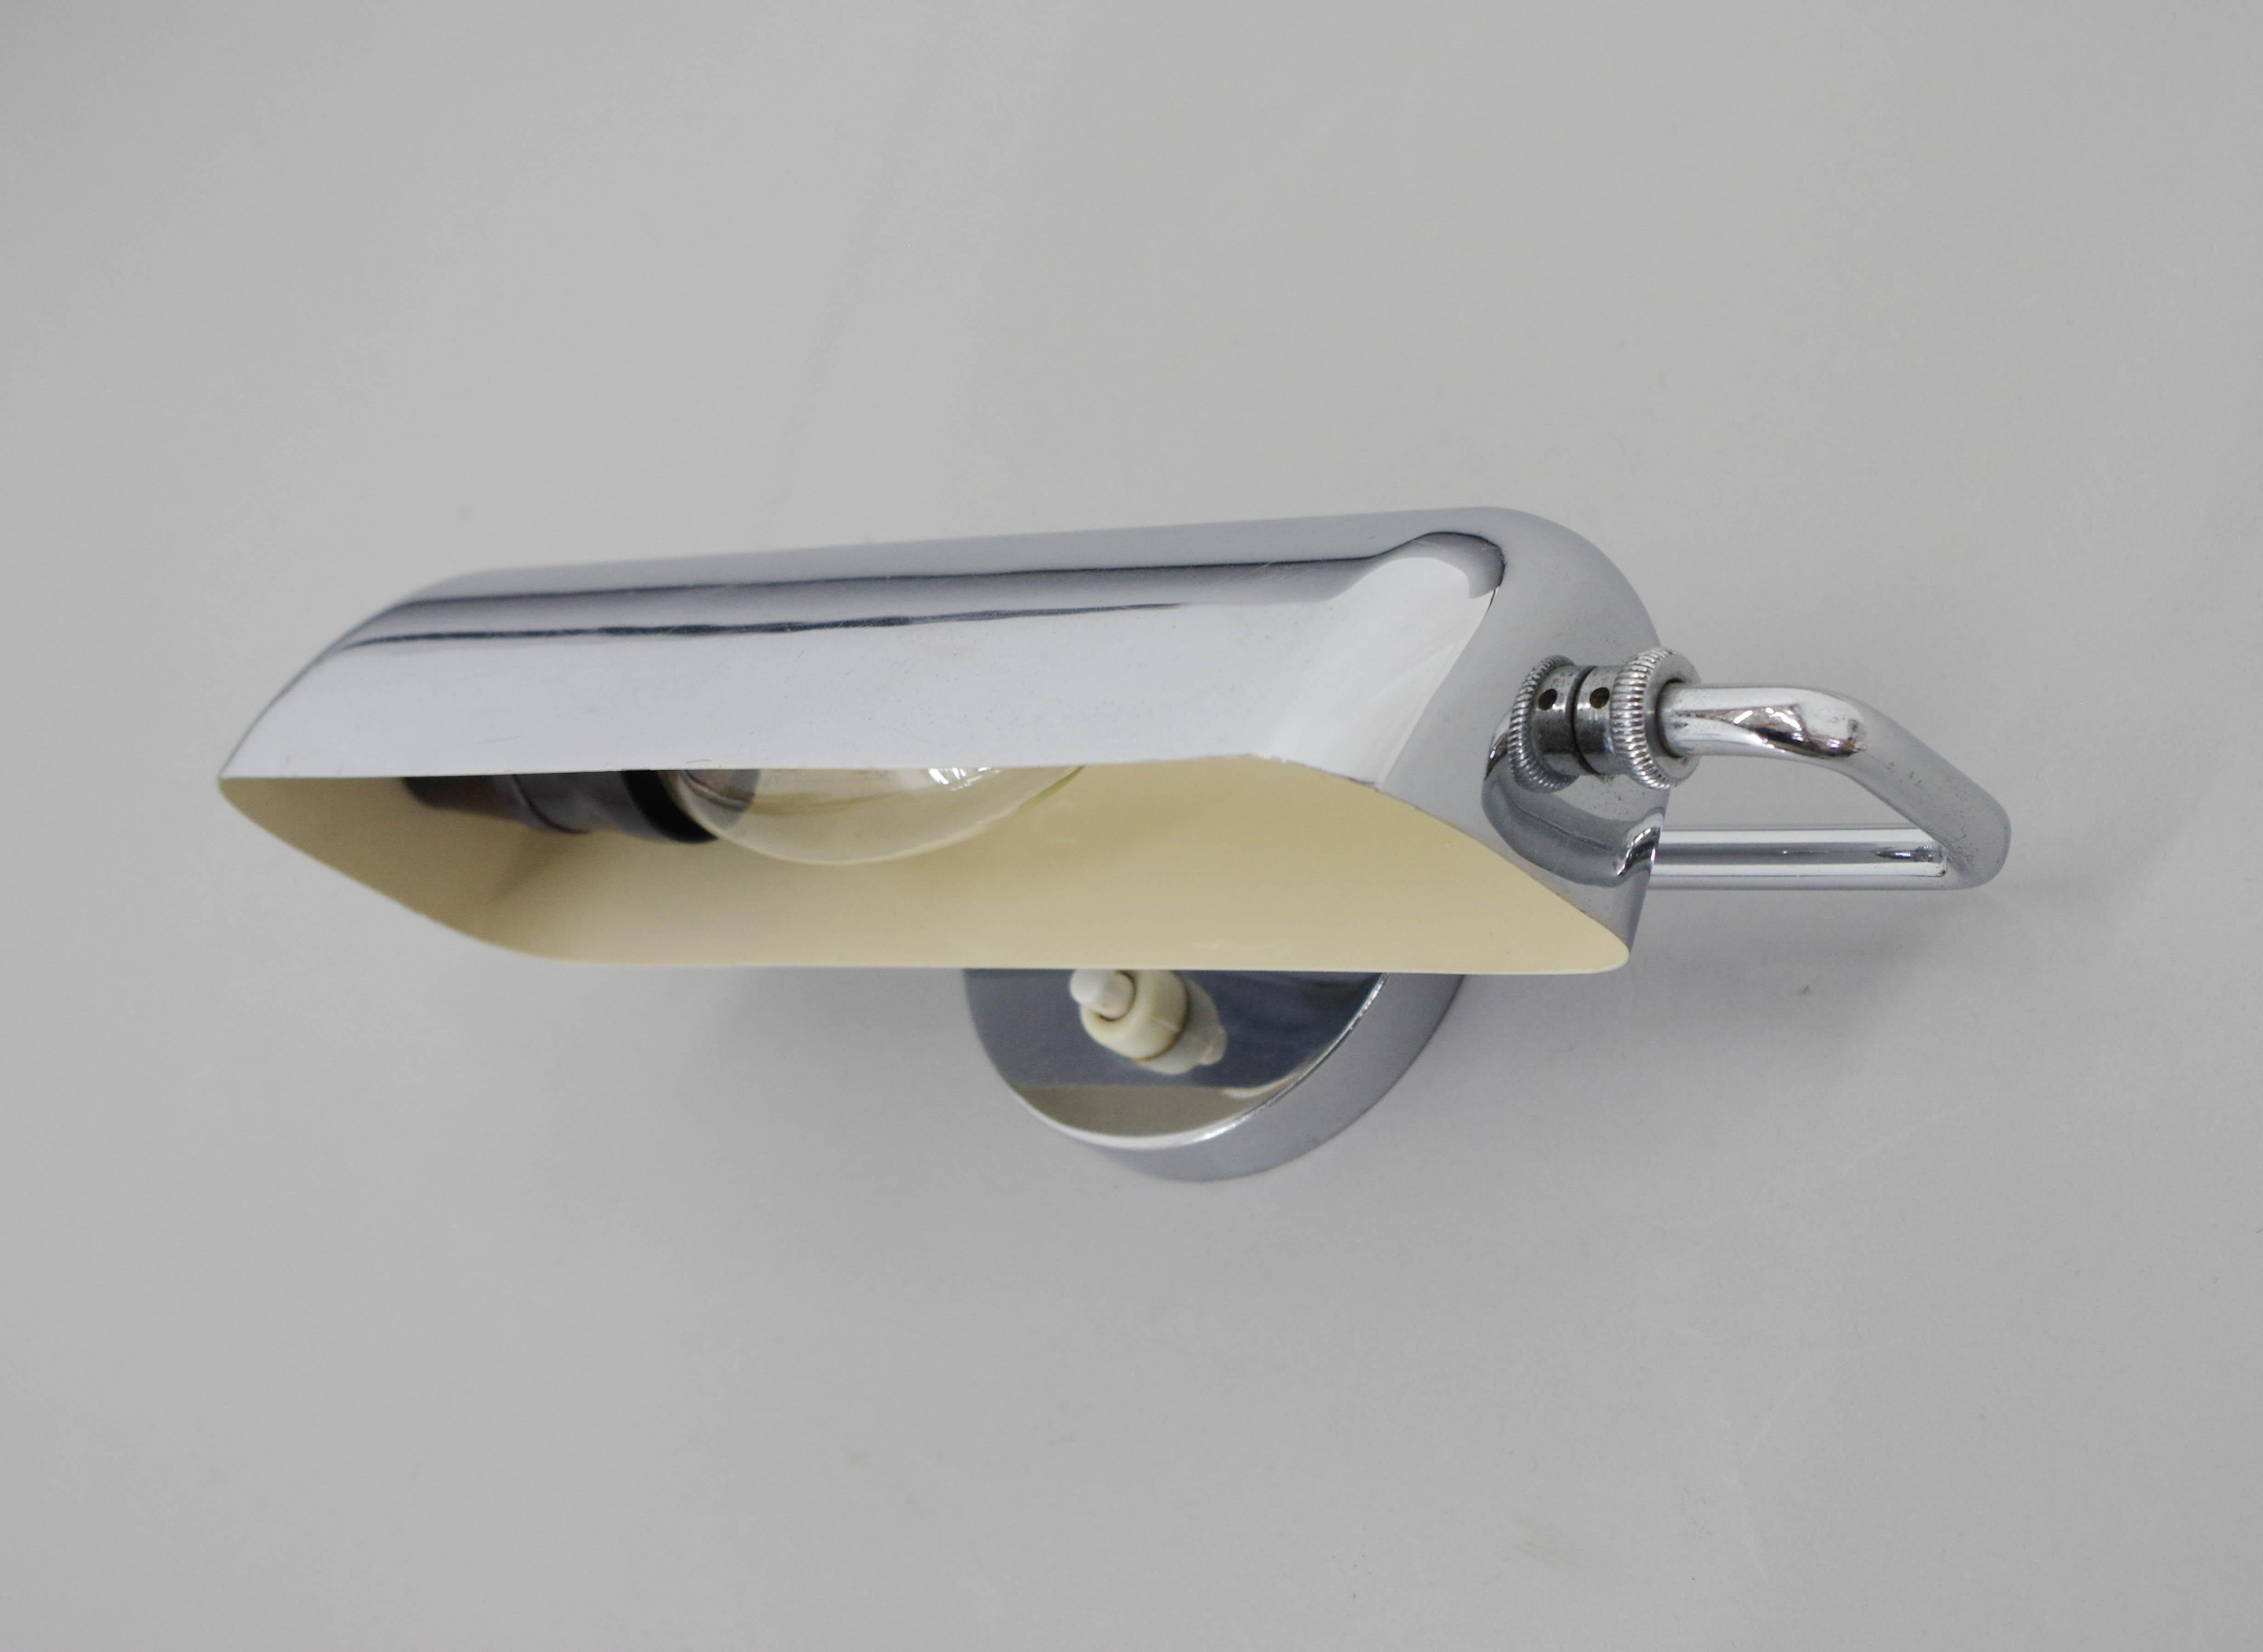 Chrome Bauhaus / Functionalist Wall Lamp with Rotating Shade, 1930s, Restored For Sale